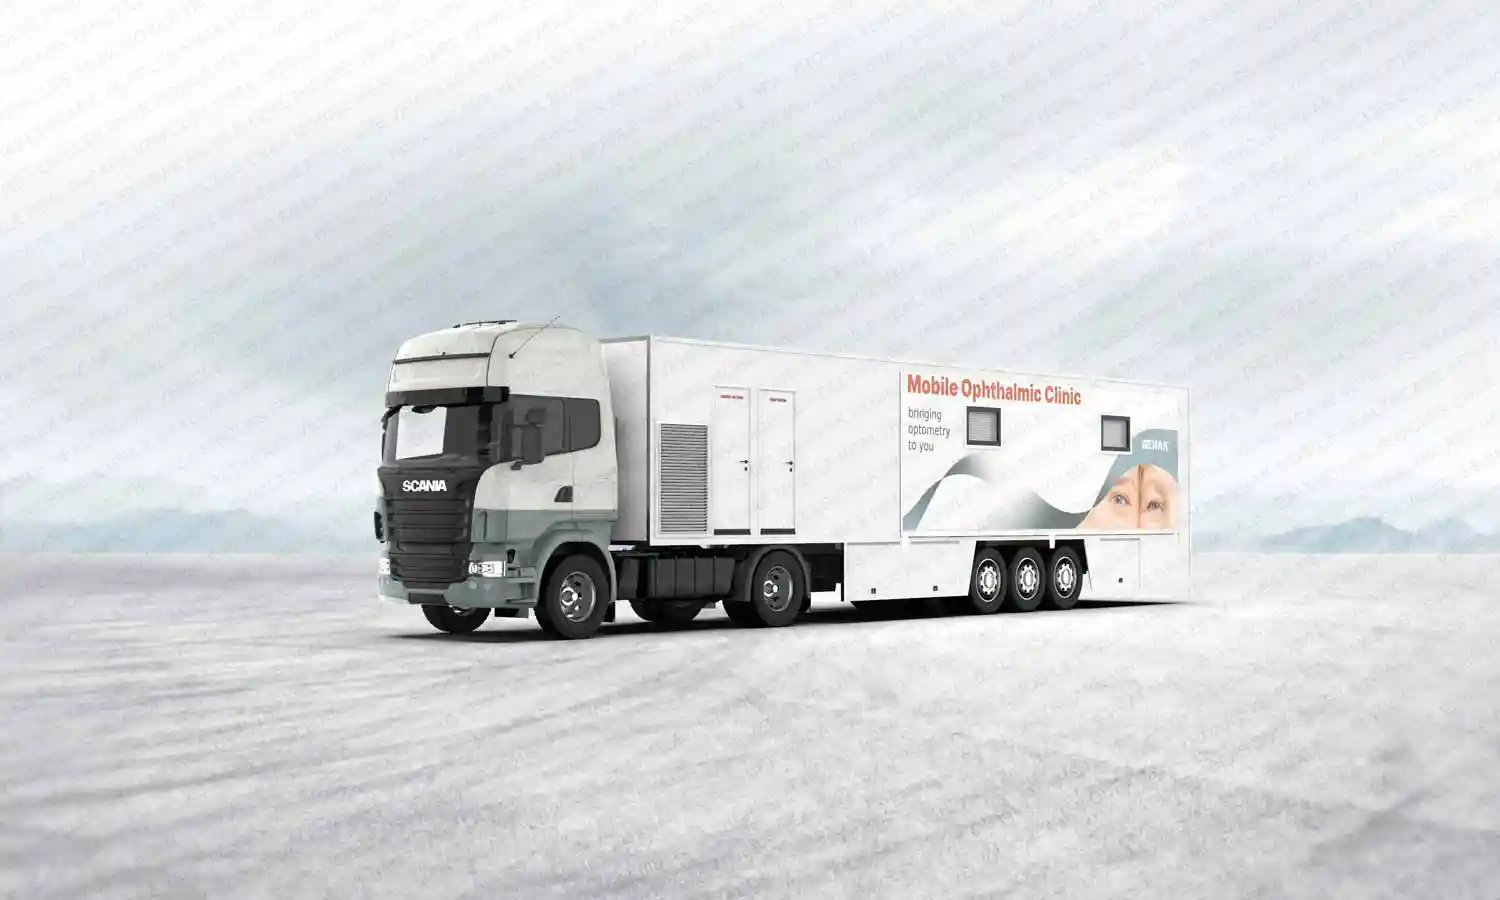 Mobile Ophtalmic Clinic-Long Trailer